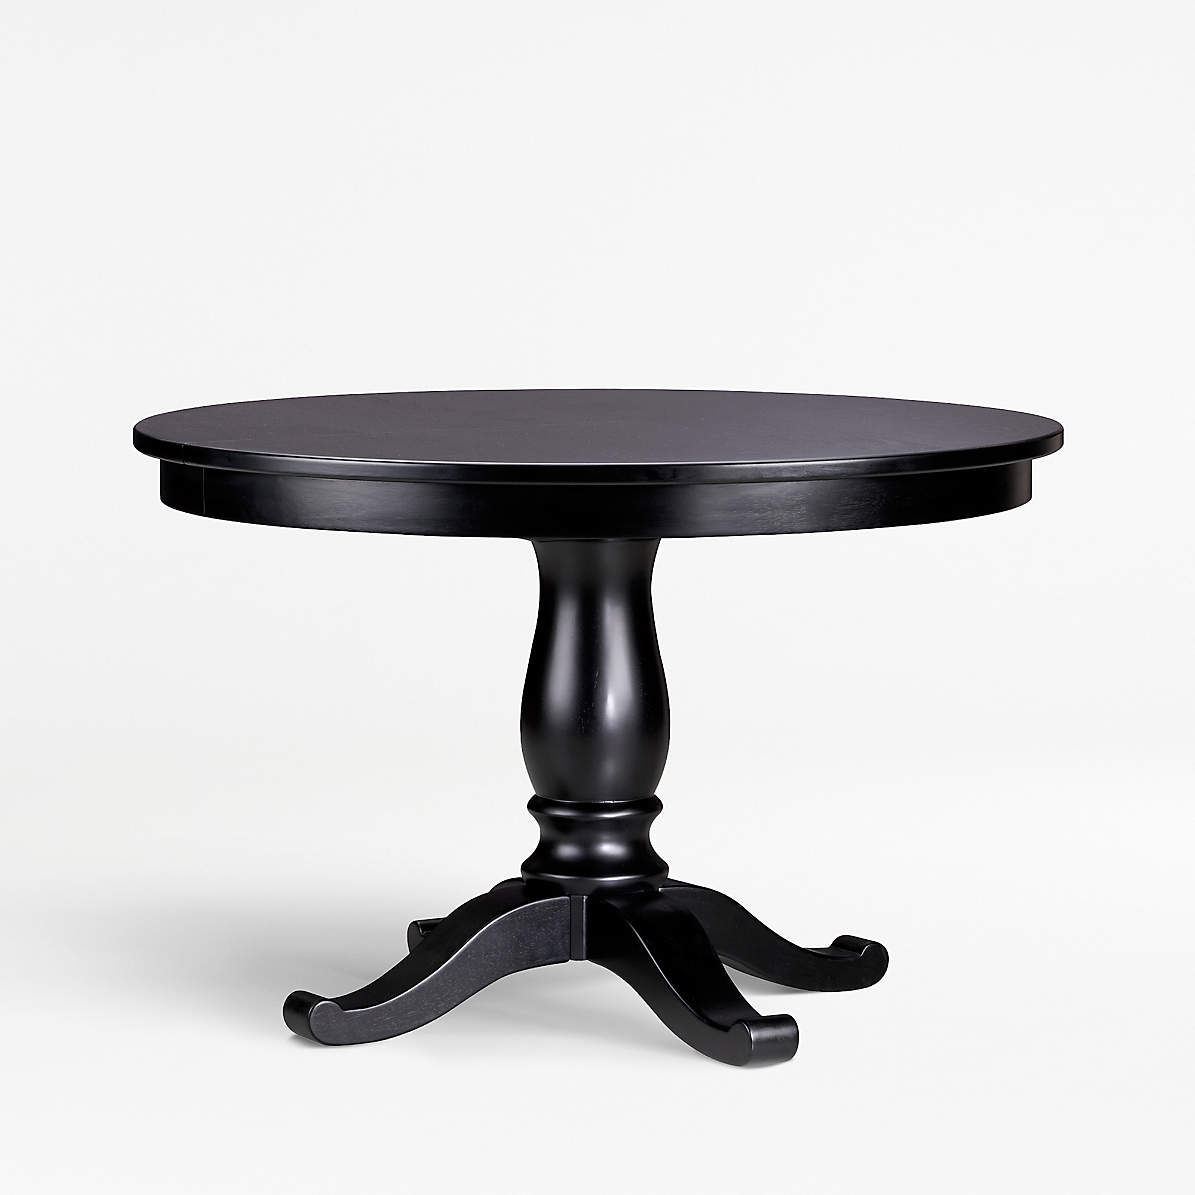 Small Black Round Dining Table Off 53, Small Round Black Table